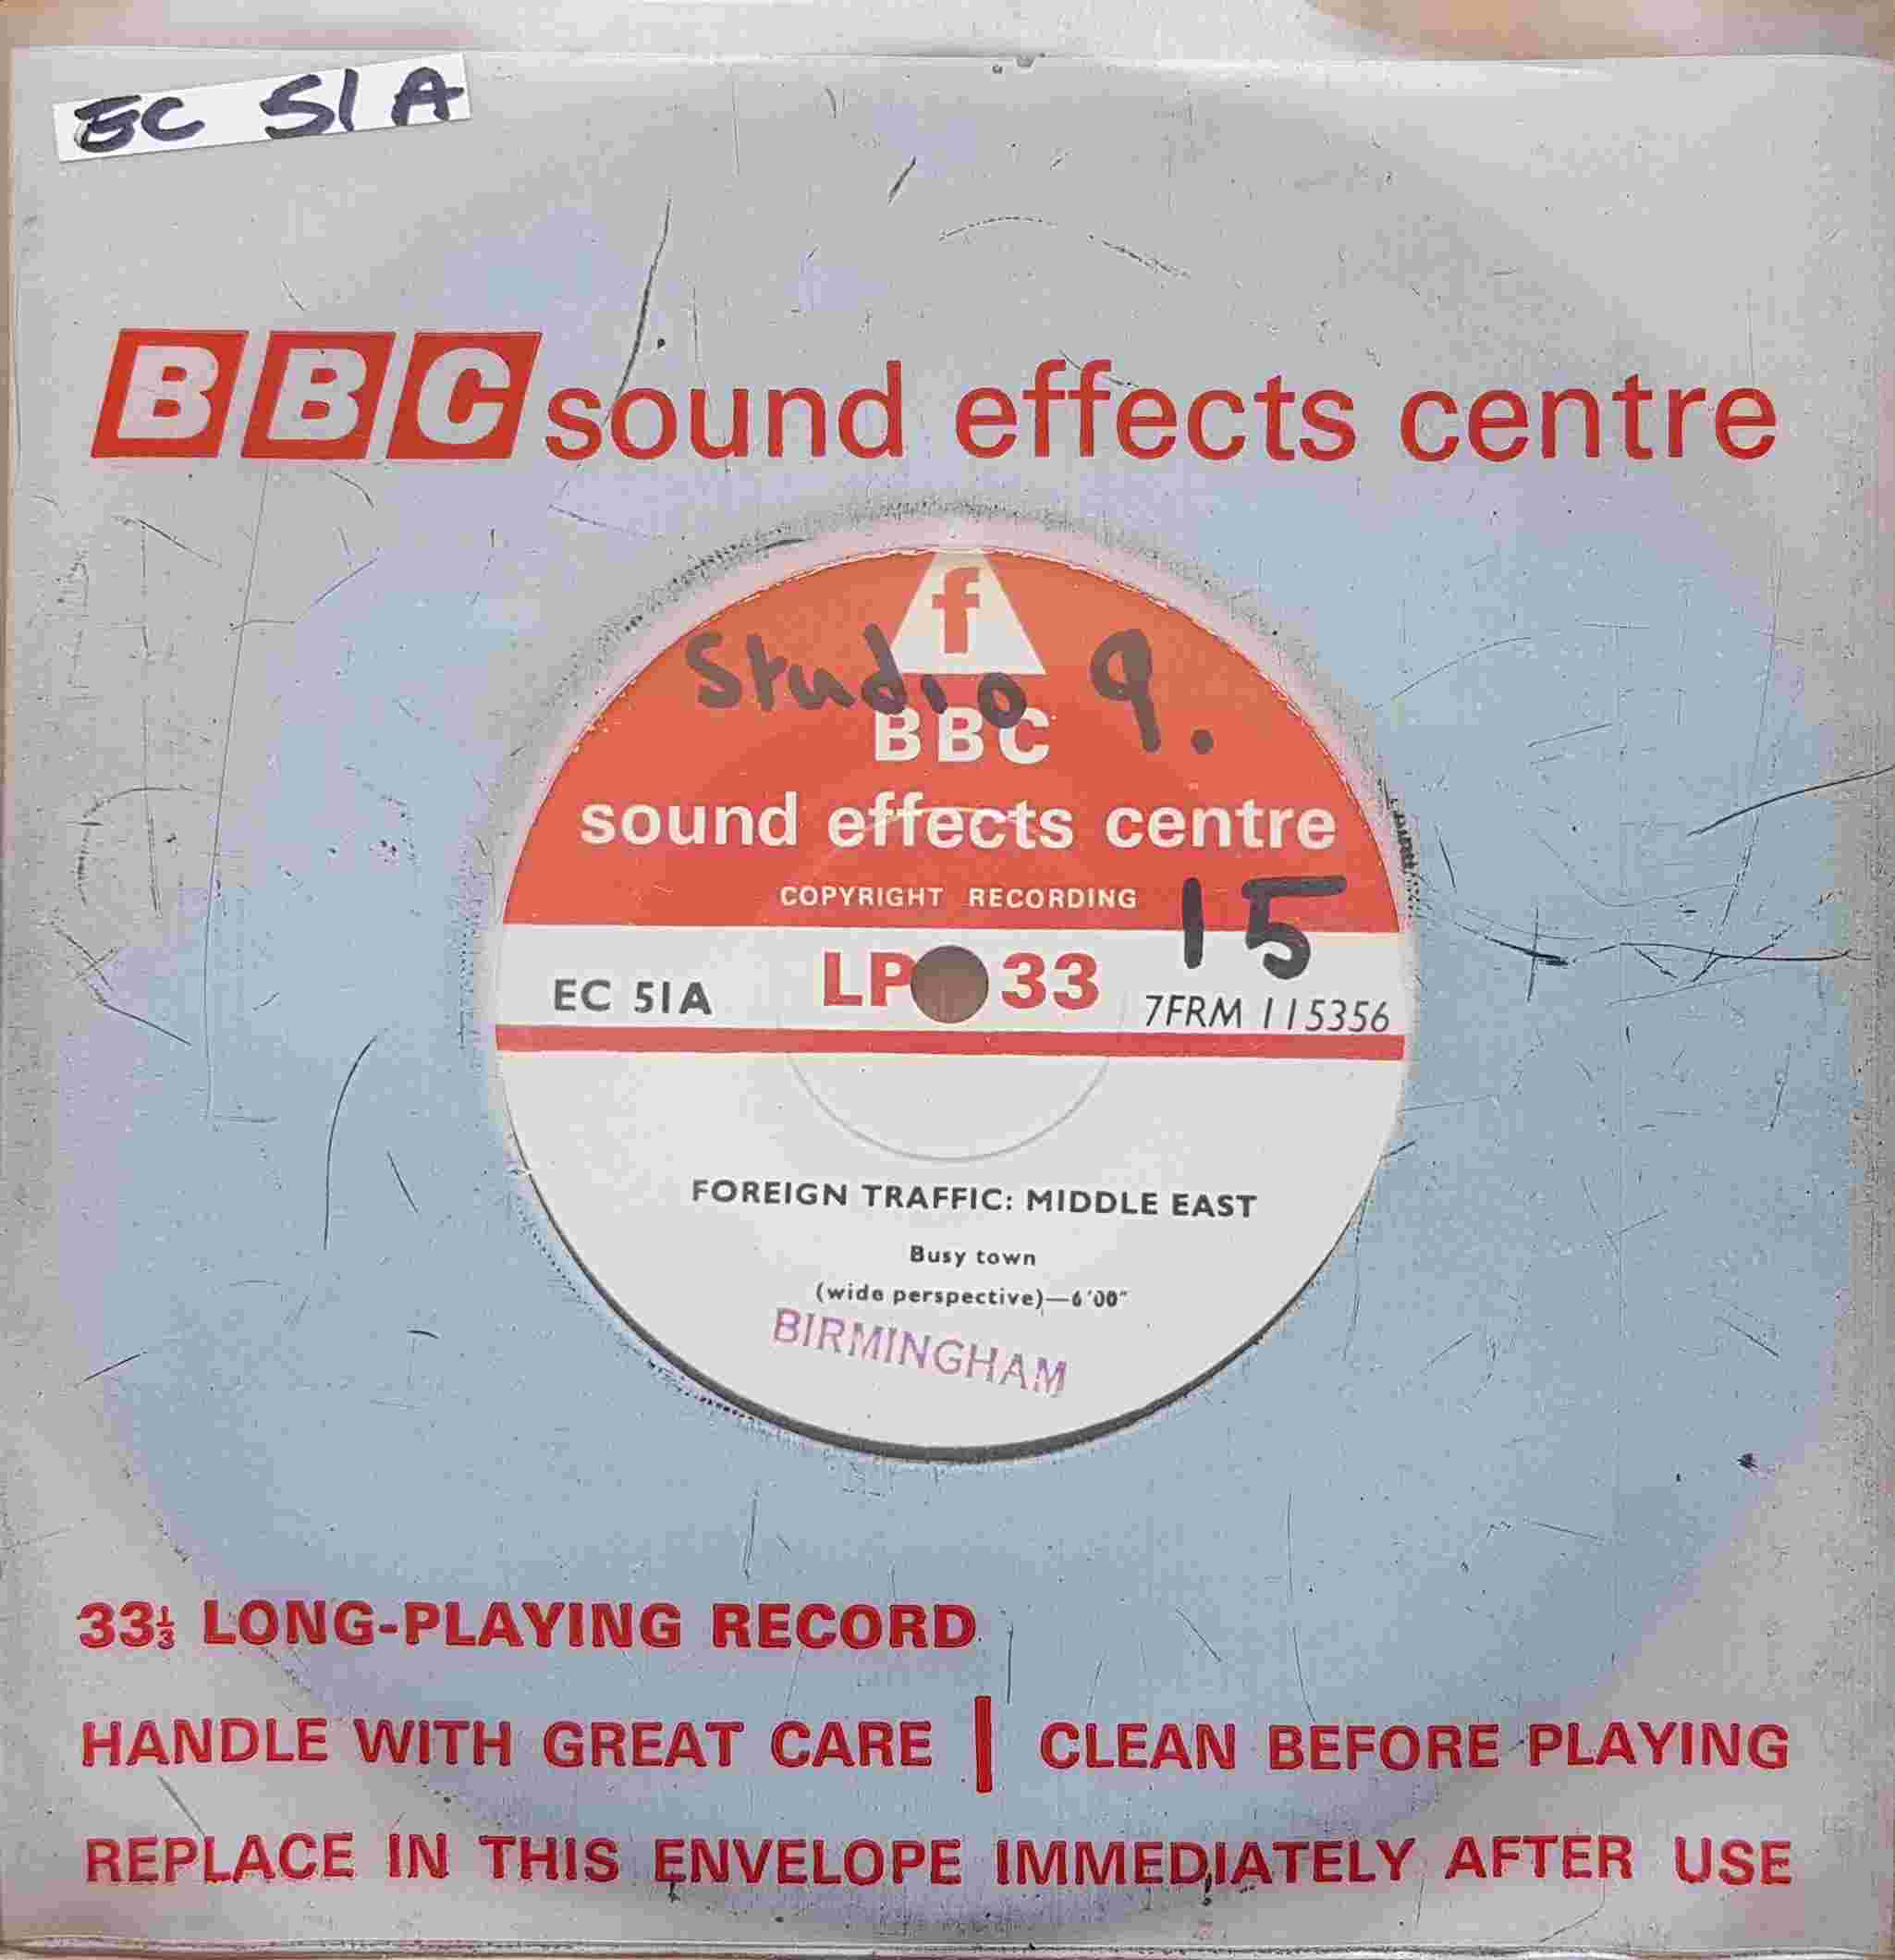 Picture of EC 51A Foreign traffic - Middle East by artist Not registered from the BBC records and Tapes library